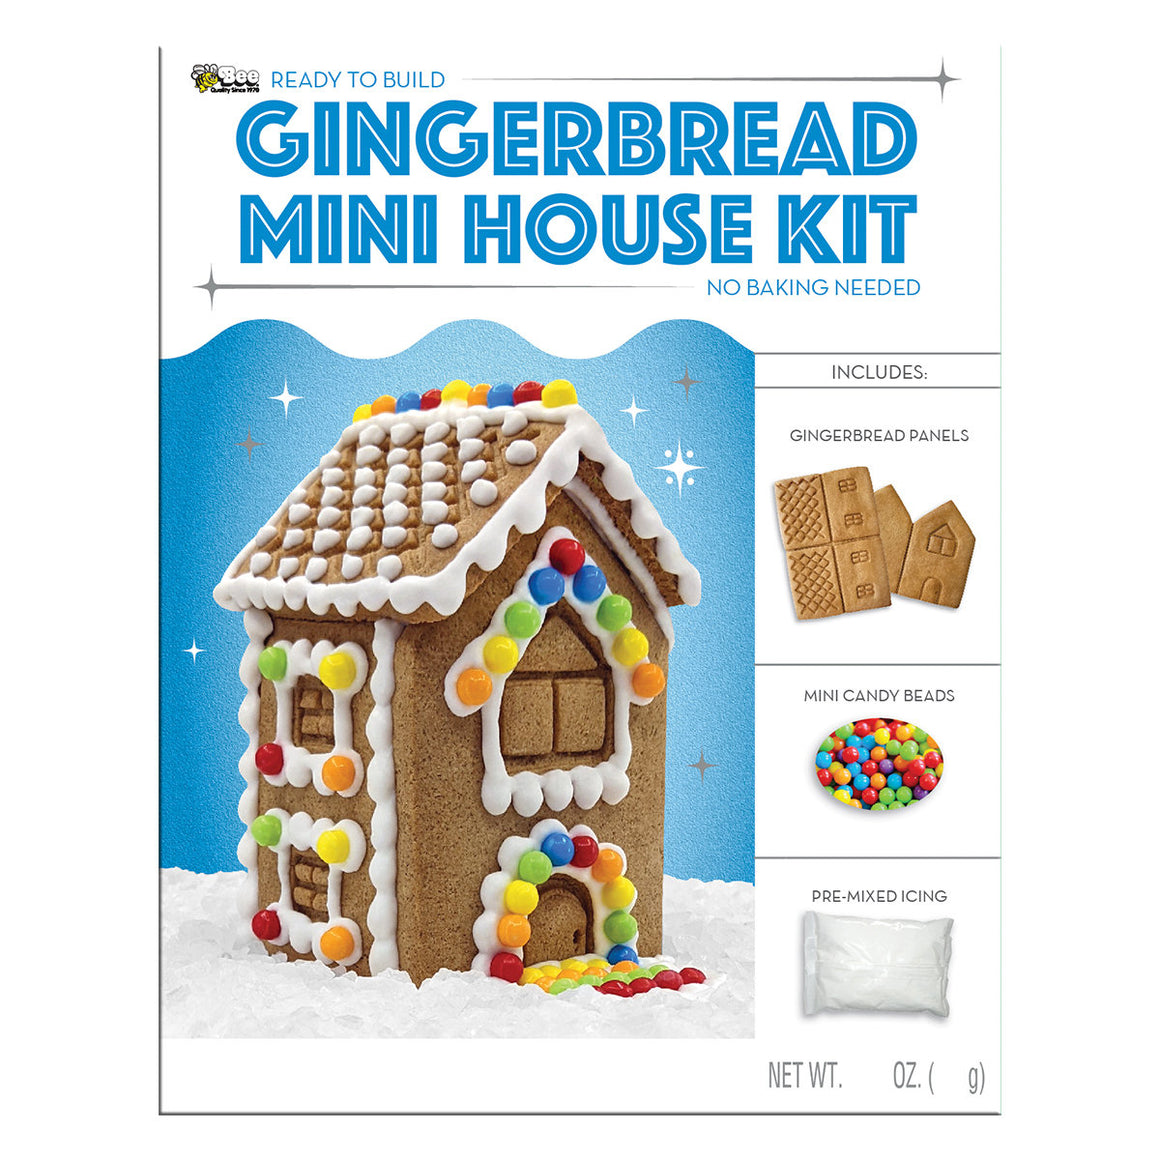 All City Candy Gingerbread Mini House Kit 6.75 oz. Bee International Candy For fresh candy and great service, visit www.allcitycandy.com